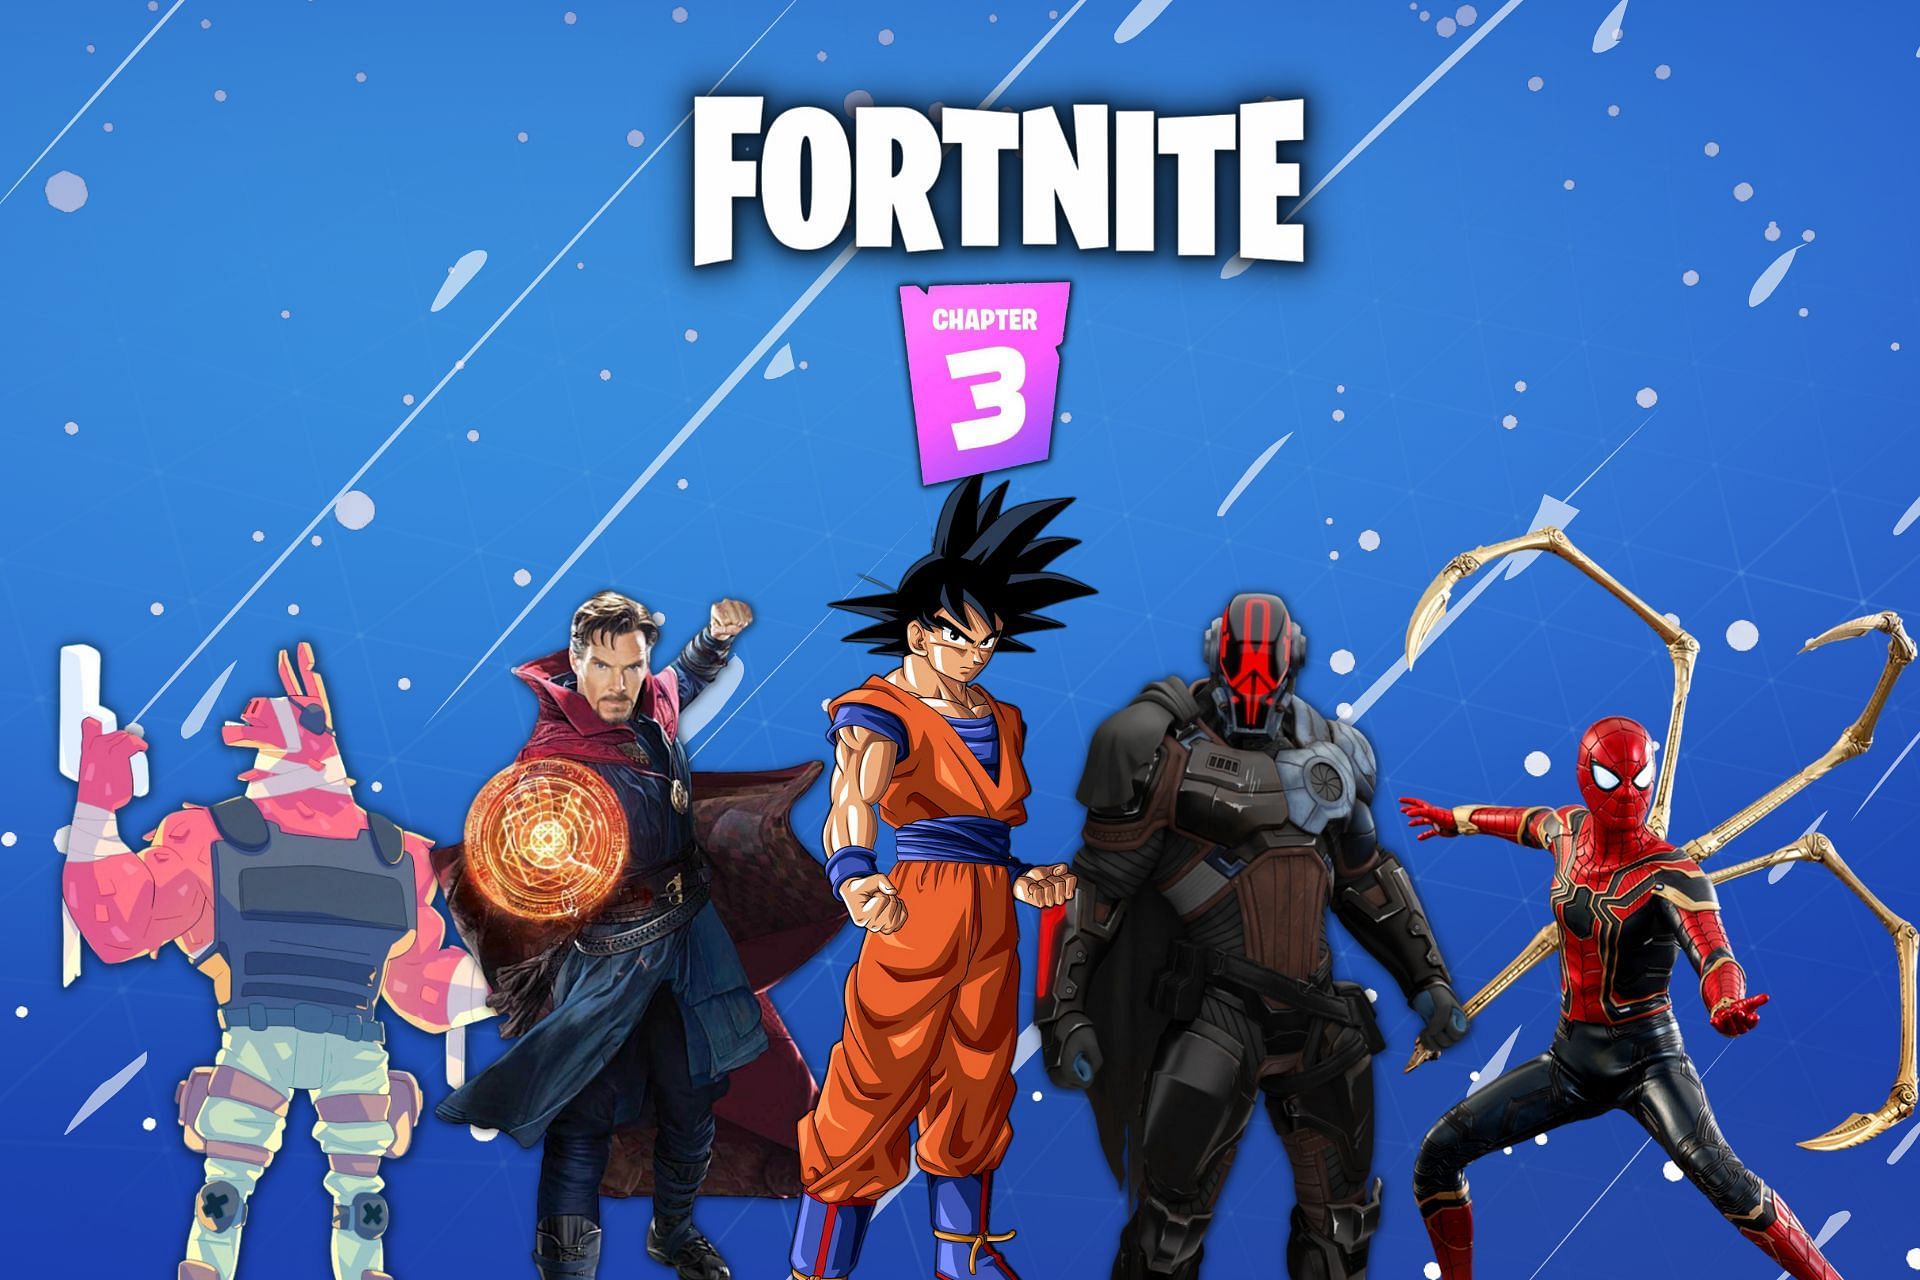 Top five expected Battle Pass skins in Fortnite Chapter 3 (Image via Sportskeeda)